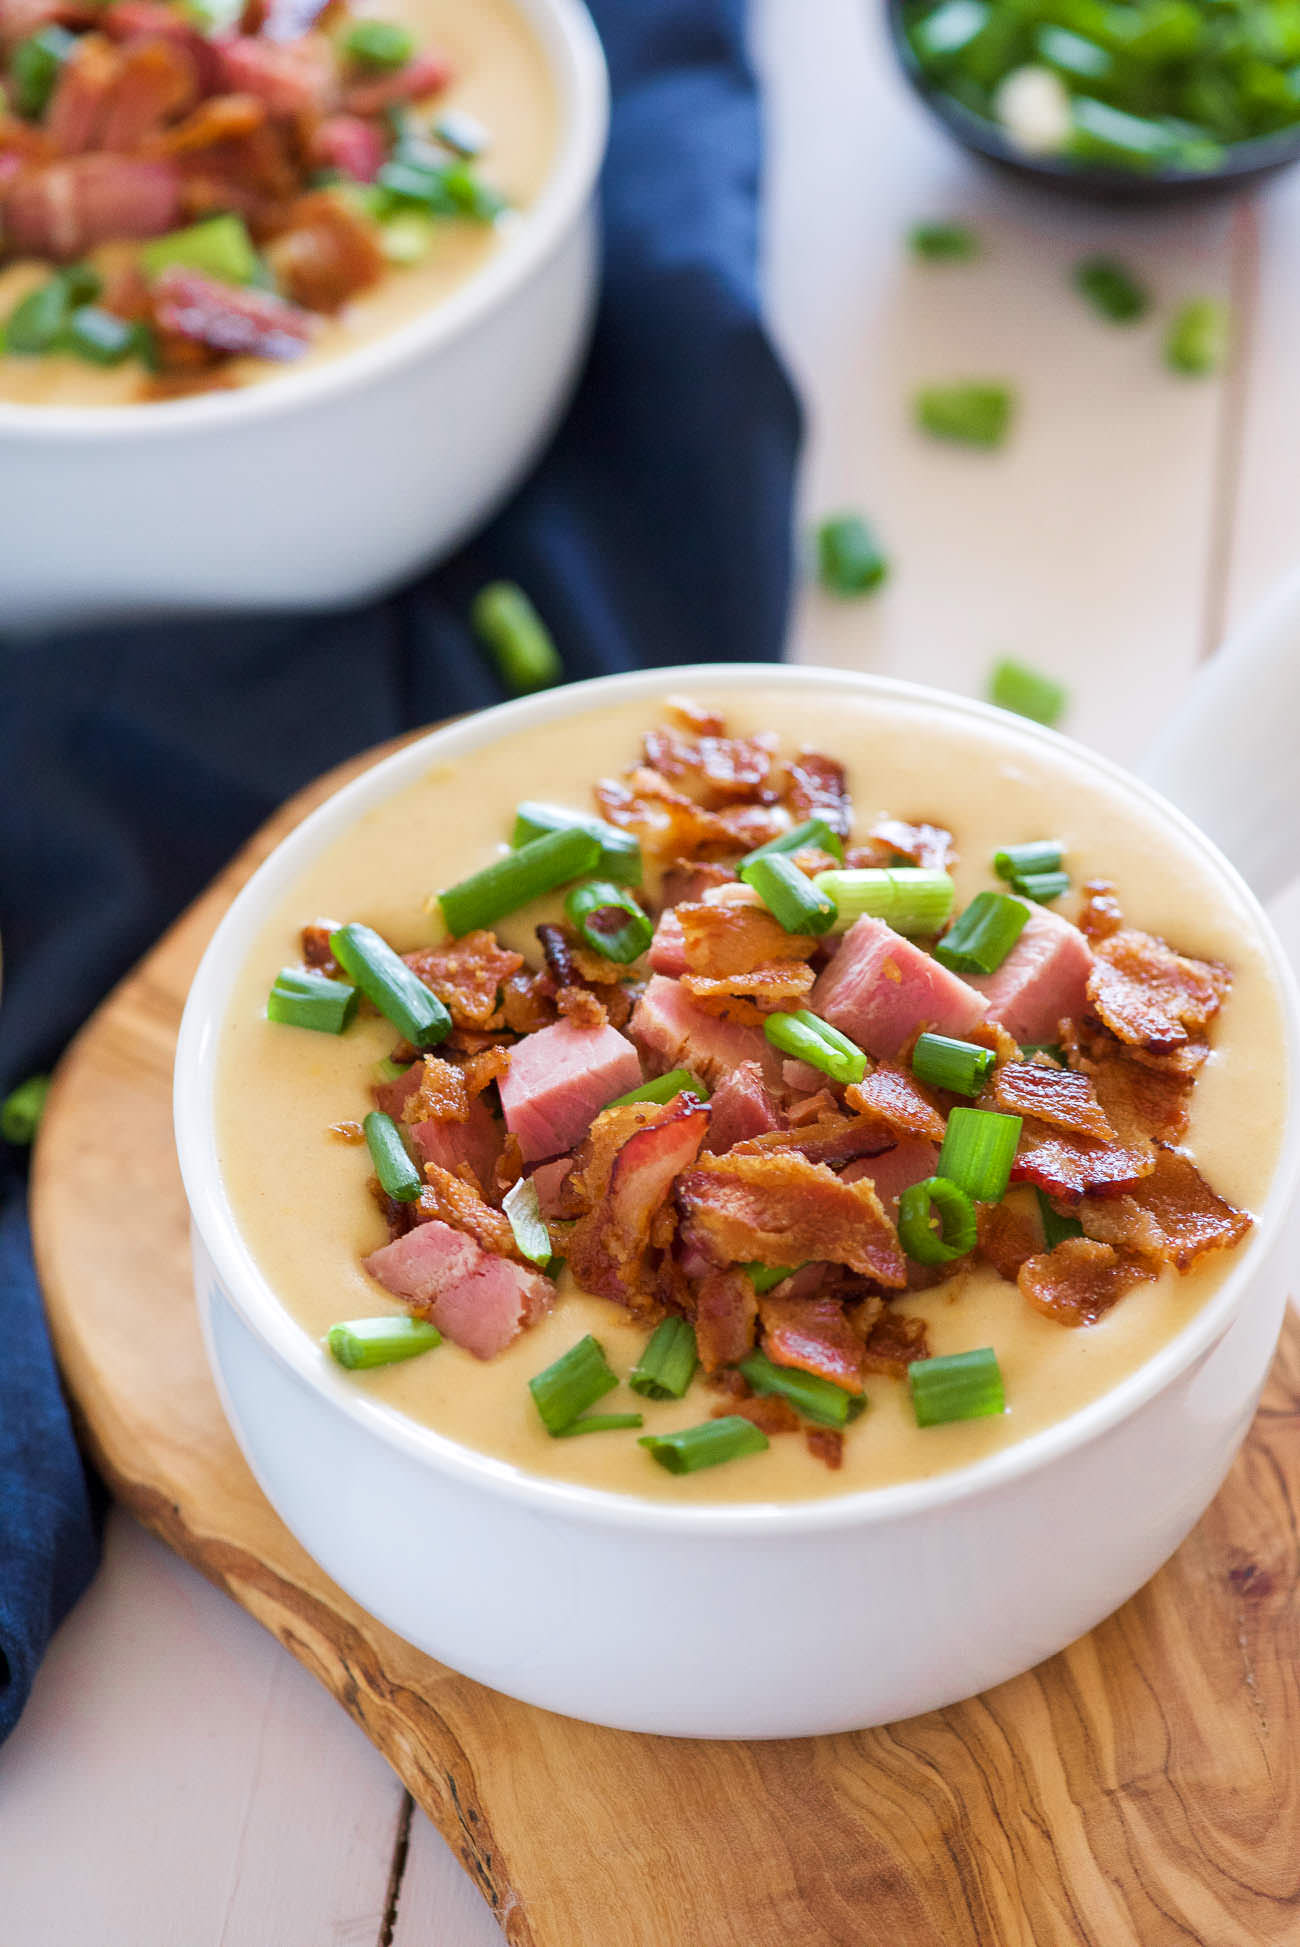 For those cheese and beer lovers - this Ham and White Cheddar Beer Cheese Soup is delicious creamy and full of flavor thanks to two types of cheese, beer, ham and bacon!